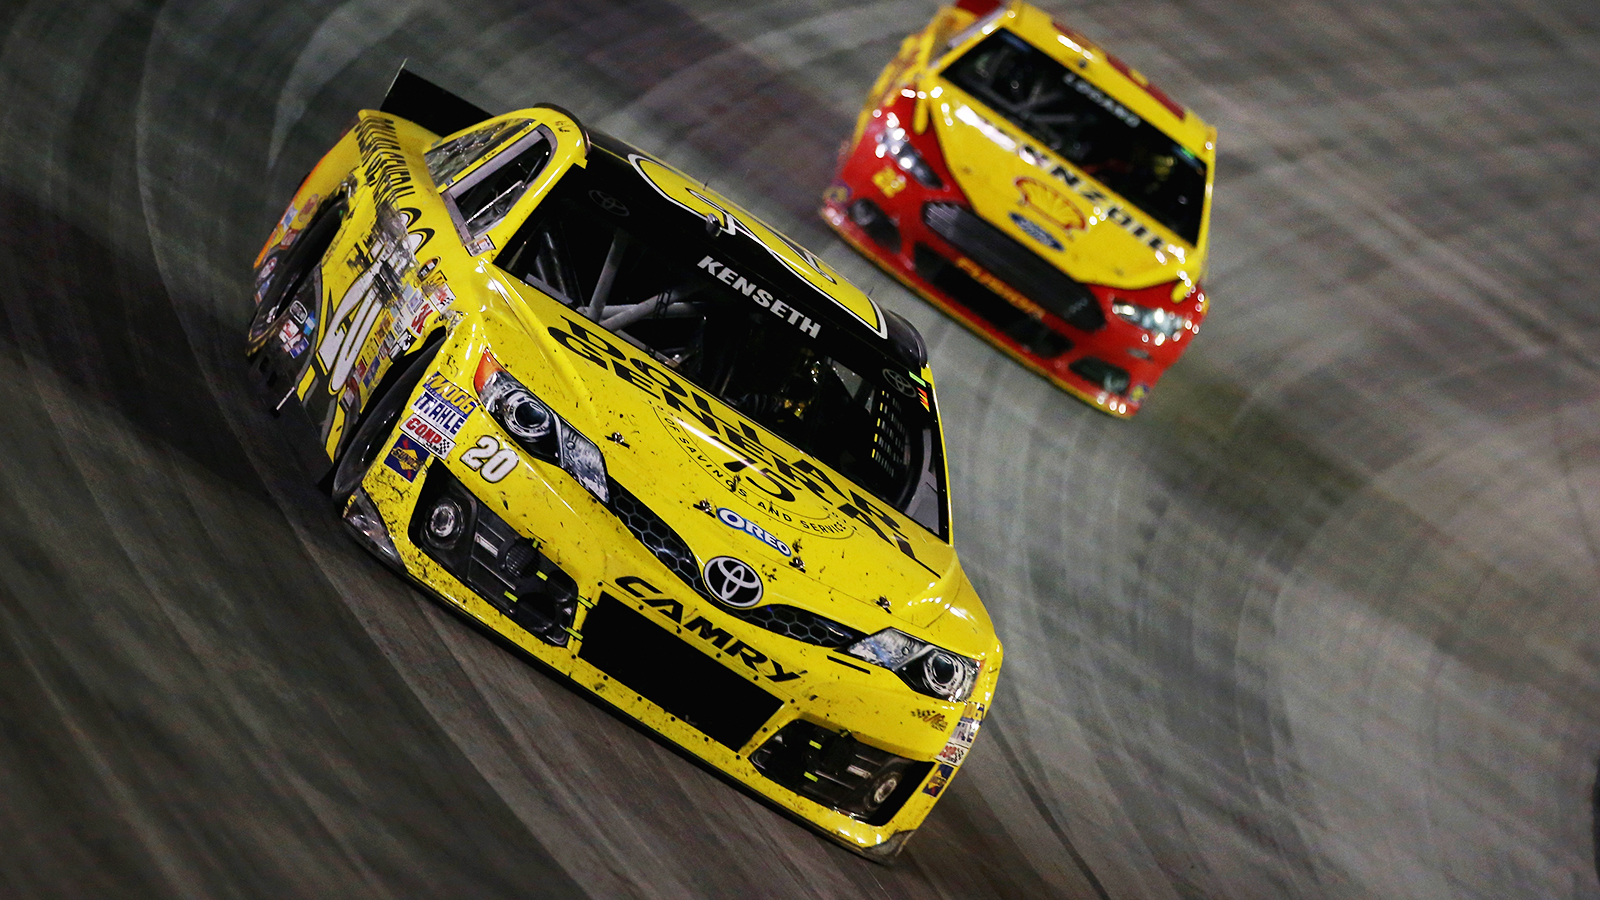 To win or not to win: Matt Kenseth gave it his best, fell just short